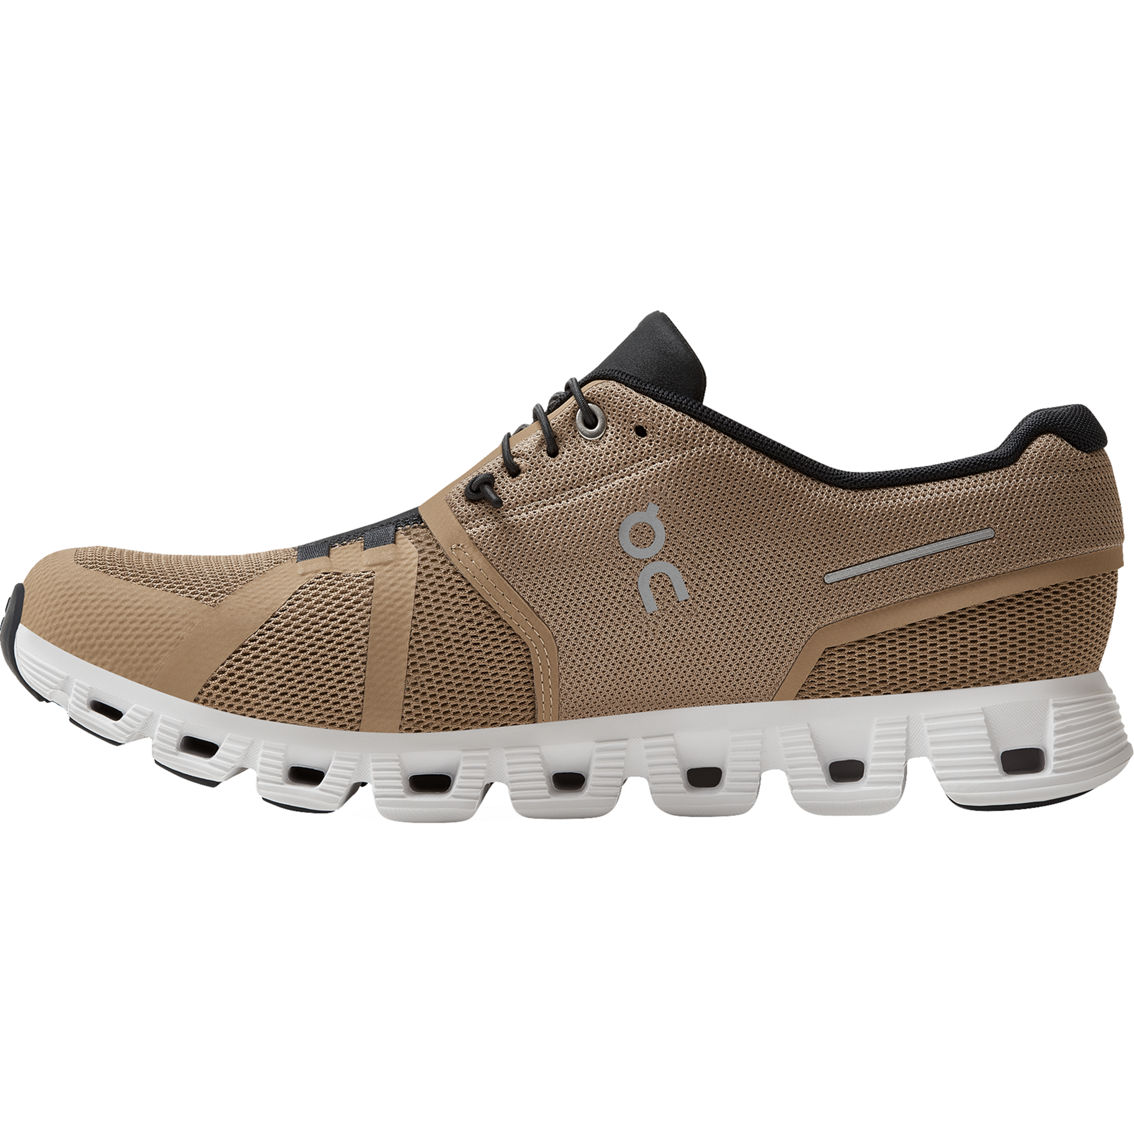 On Men's Cloud 5 Running Shoes - Image 3 of 6